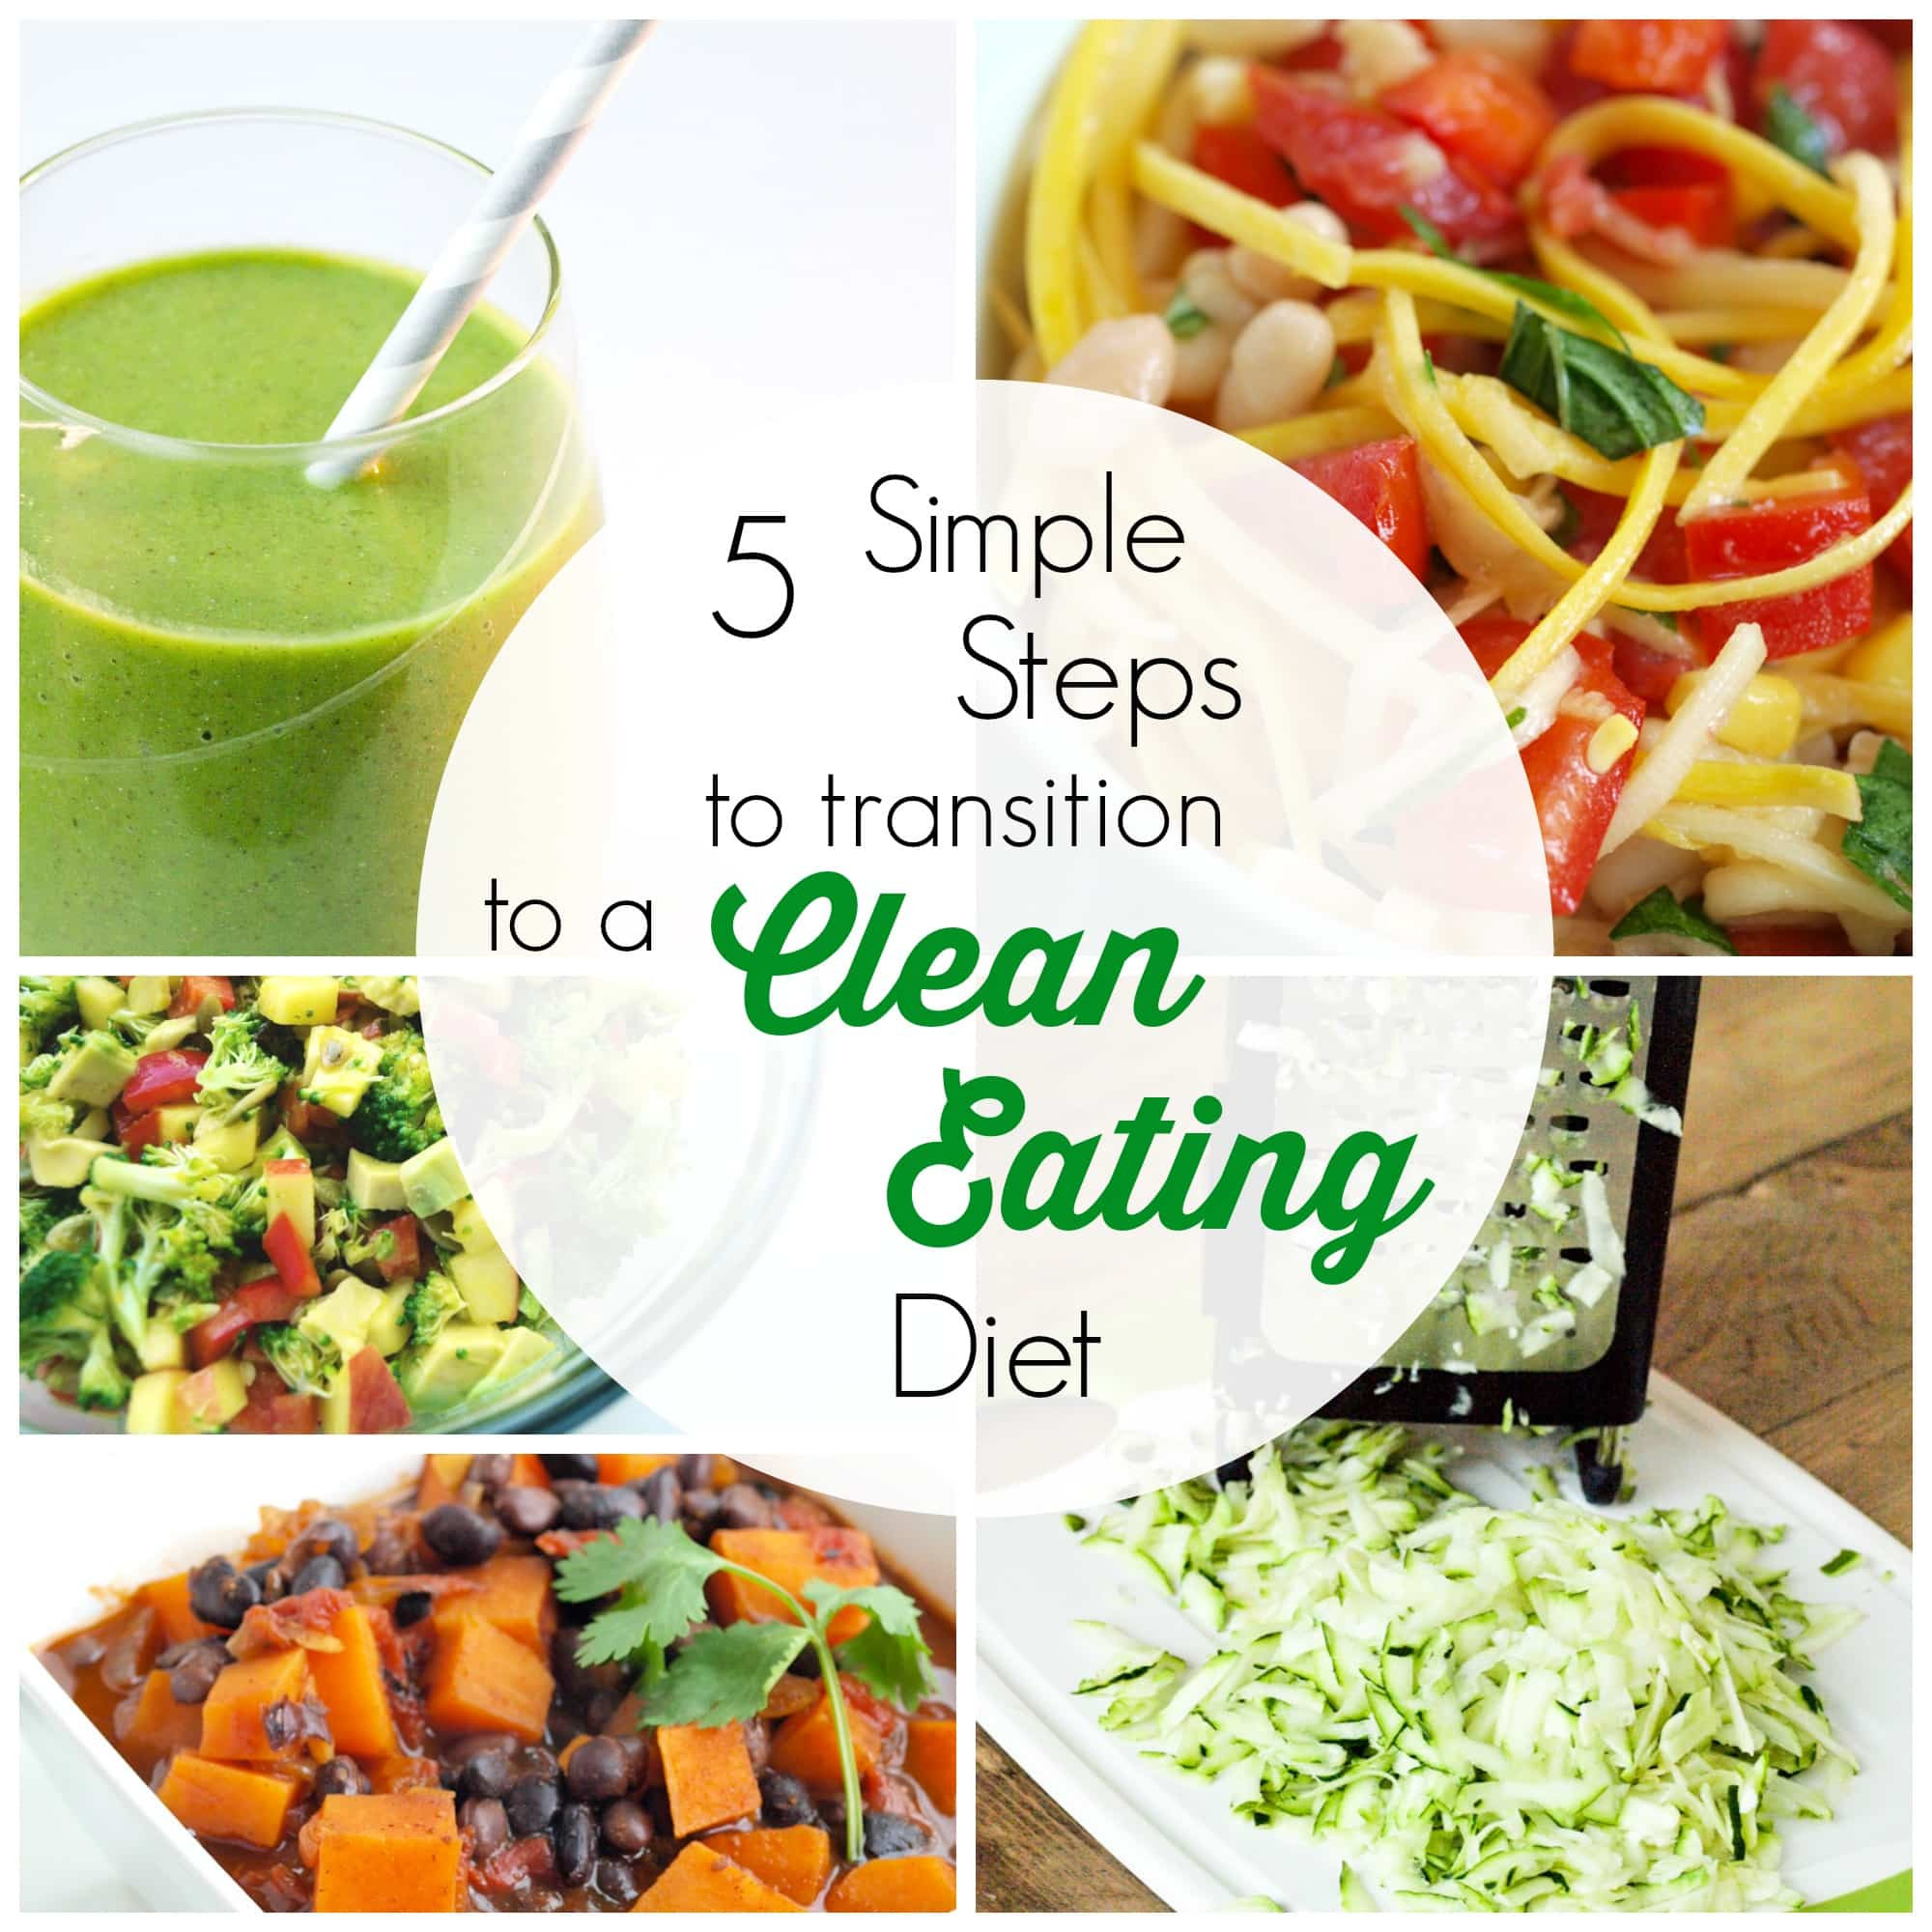 Clean Eating Diet
 5 Simple Steps to Transition to a Clean Eating Diet